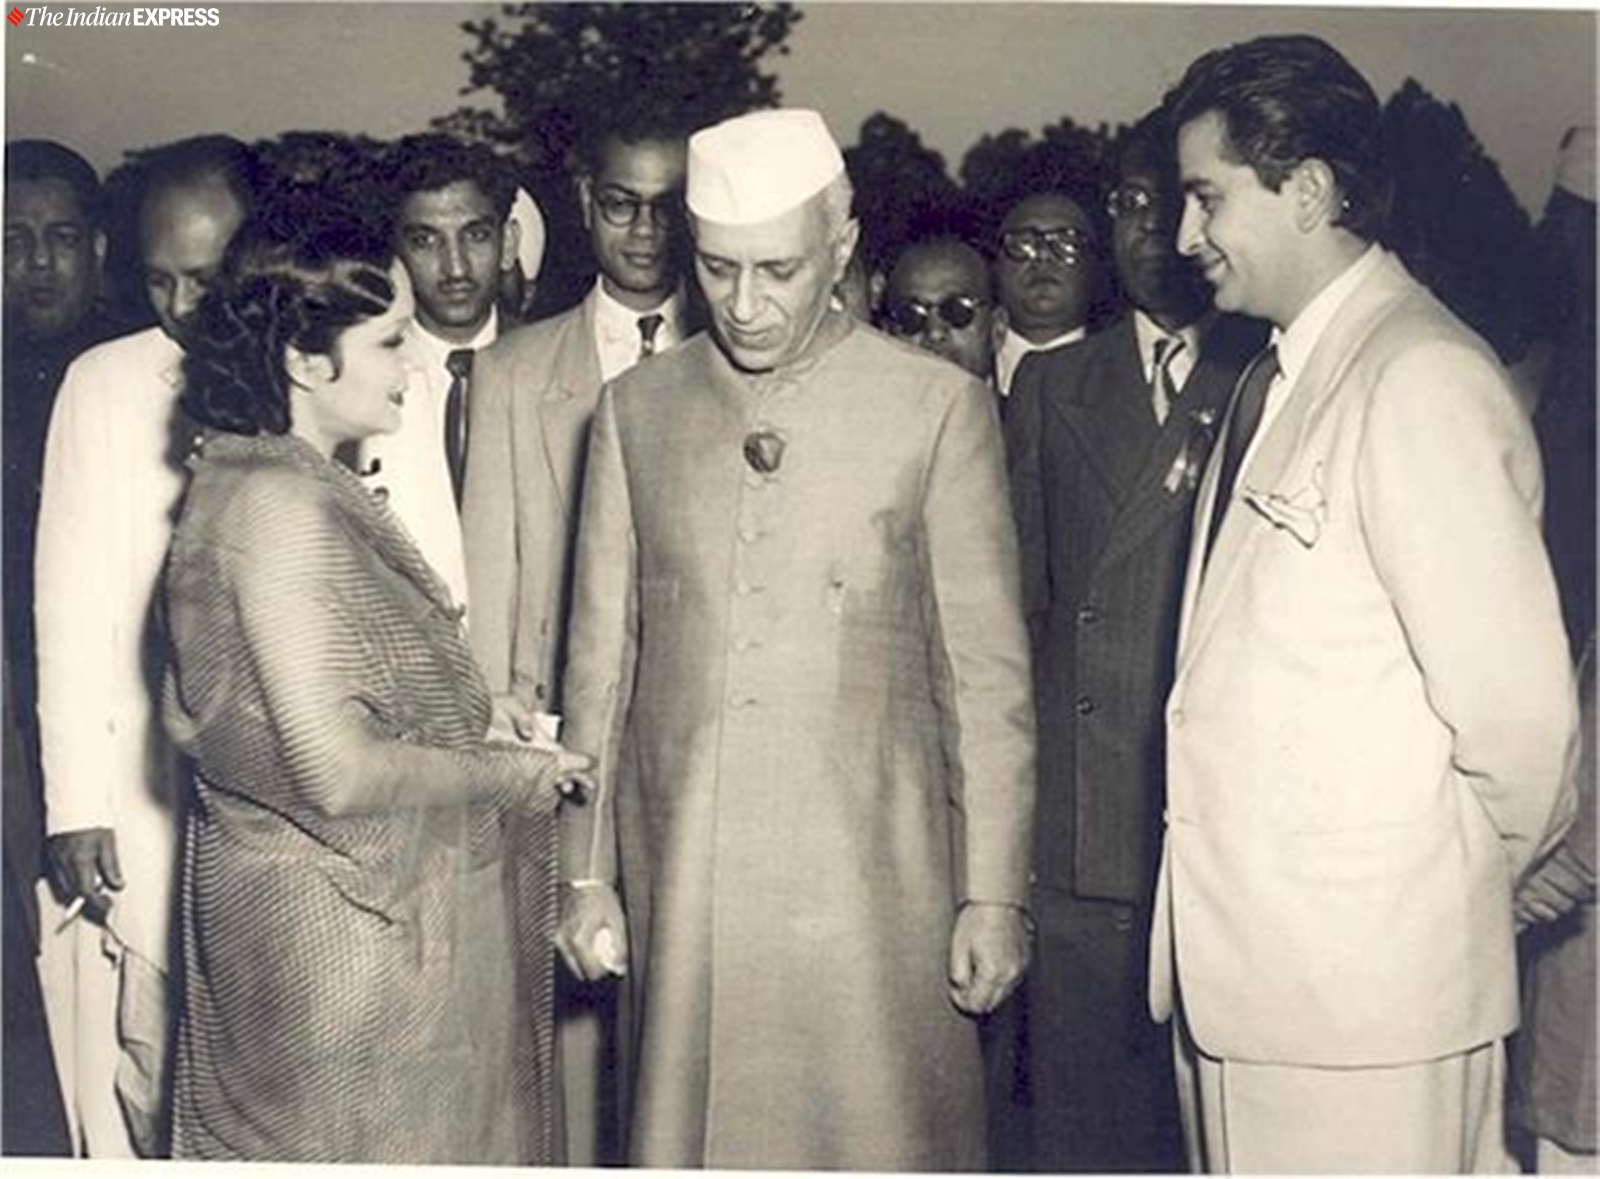 Devi Rani with Jawaharlal Nehru and Raj Kapoor, who started his career as a clapper boy at Bombay Talkies. Express archive photo.